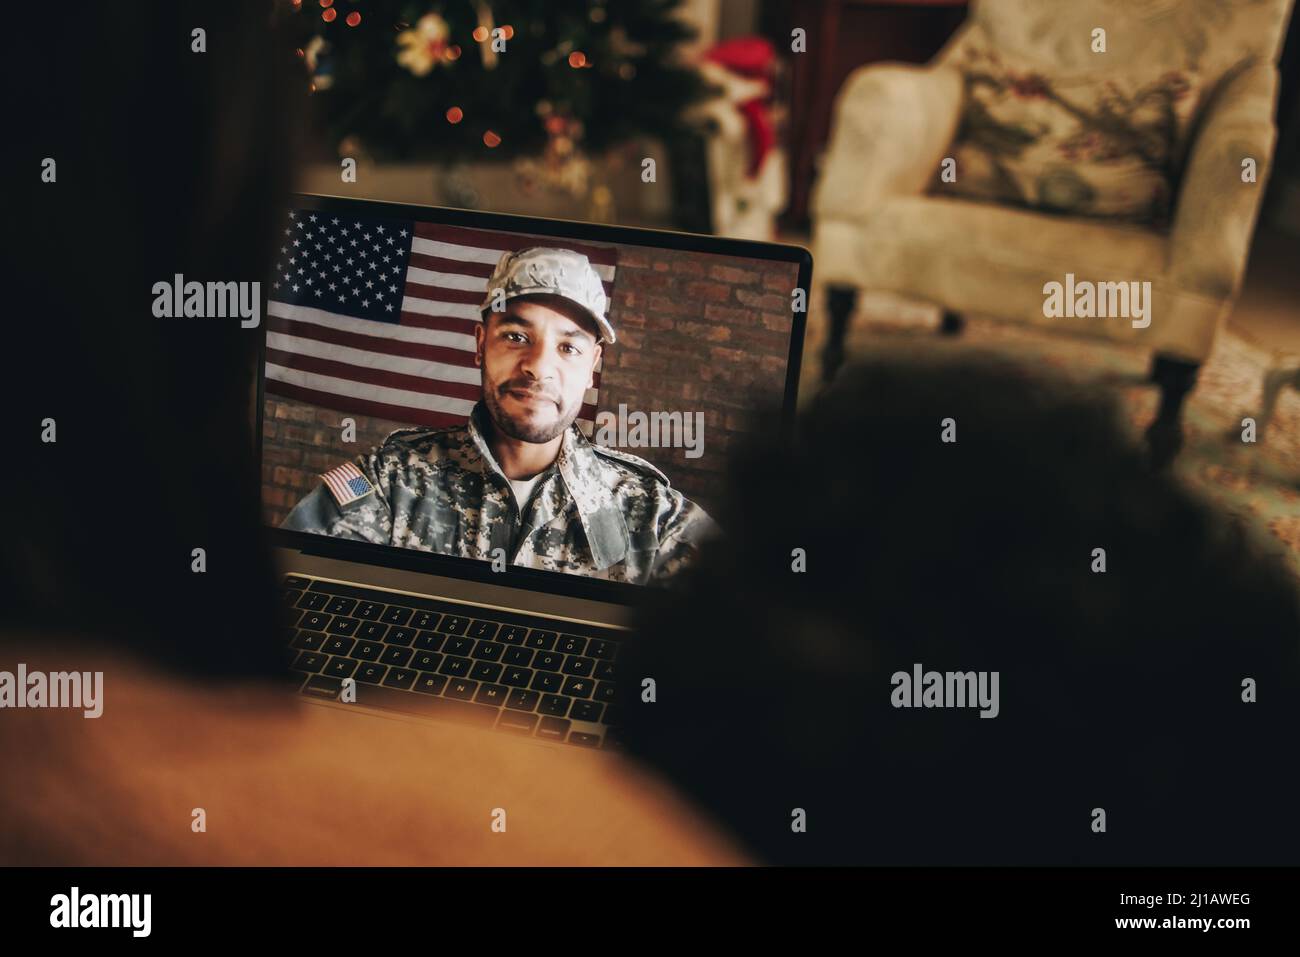 Military man video calling his family at Christmas. American soldier communicating with his family on a laptop. Military family having an online holid Stock Photo